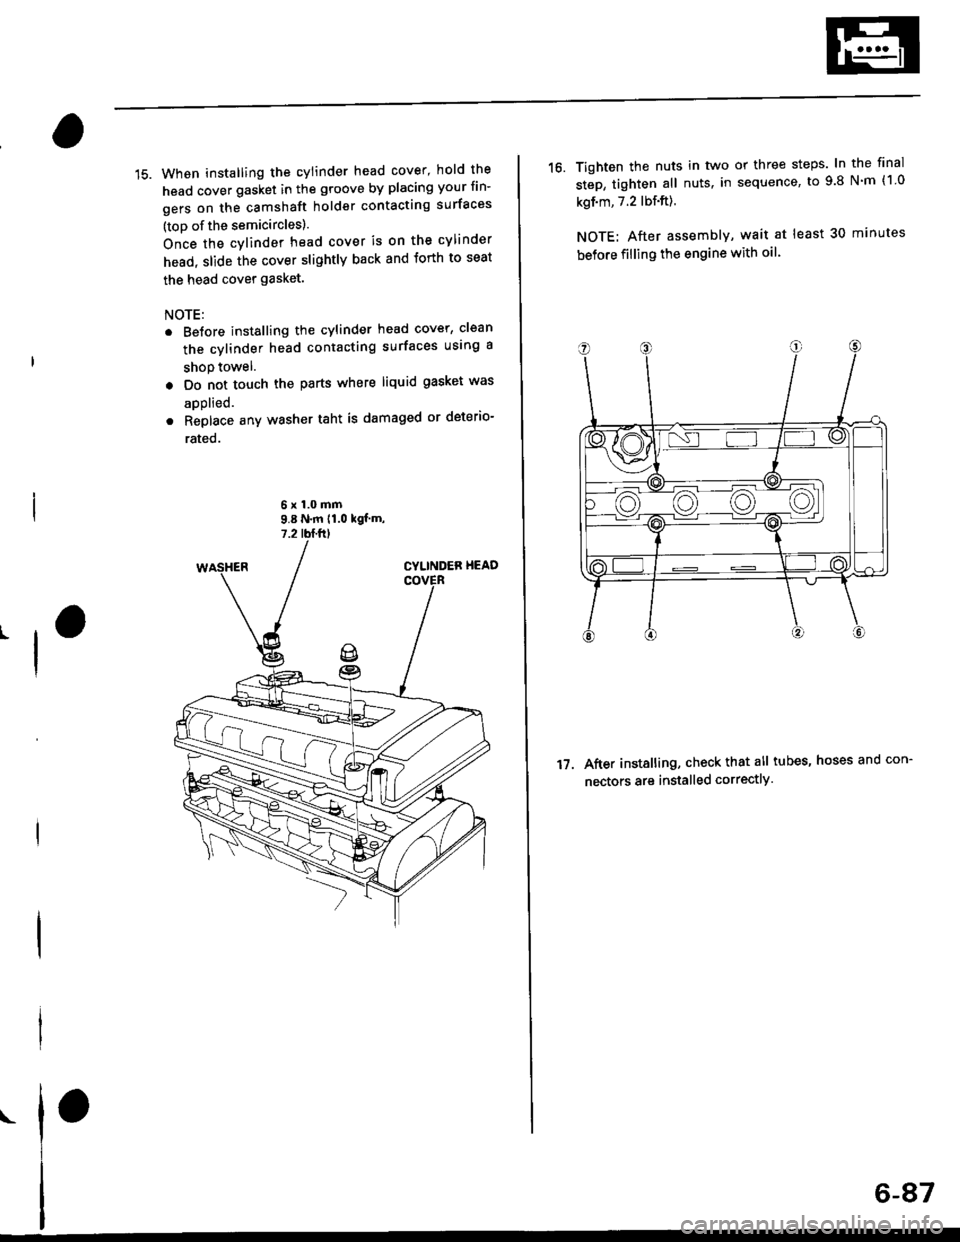 HONDA CIVIC 1996 6.G User Guide 15. When installing the cylinder head cover, hold the
head cover gasket in the groove by placing your fin-
gers on the camshaft holder contacting surfaces
(toD of the semicircles).
Once the cylinder h